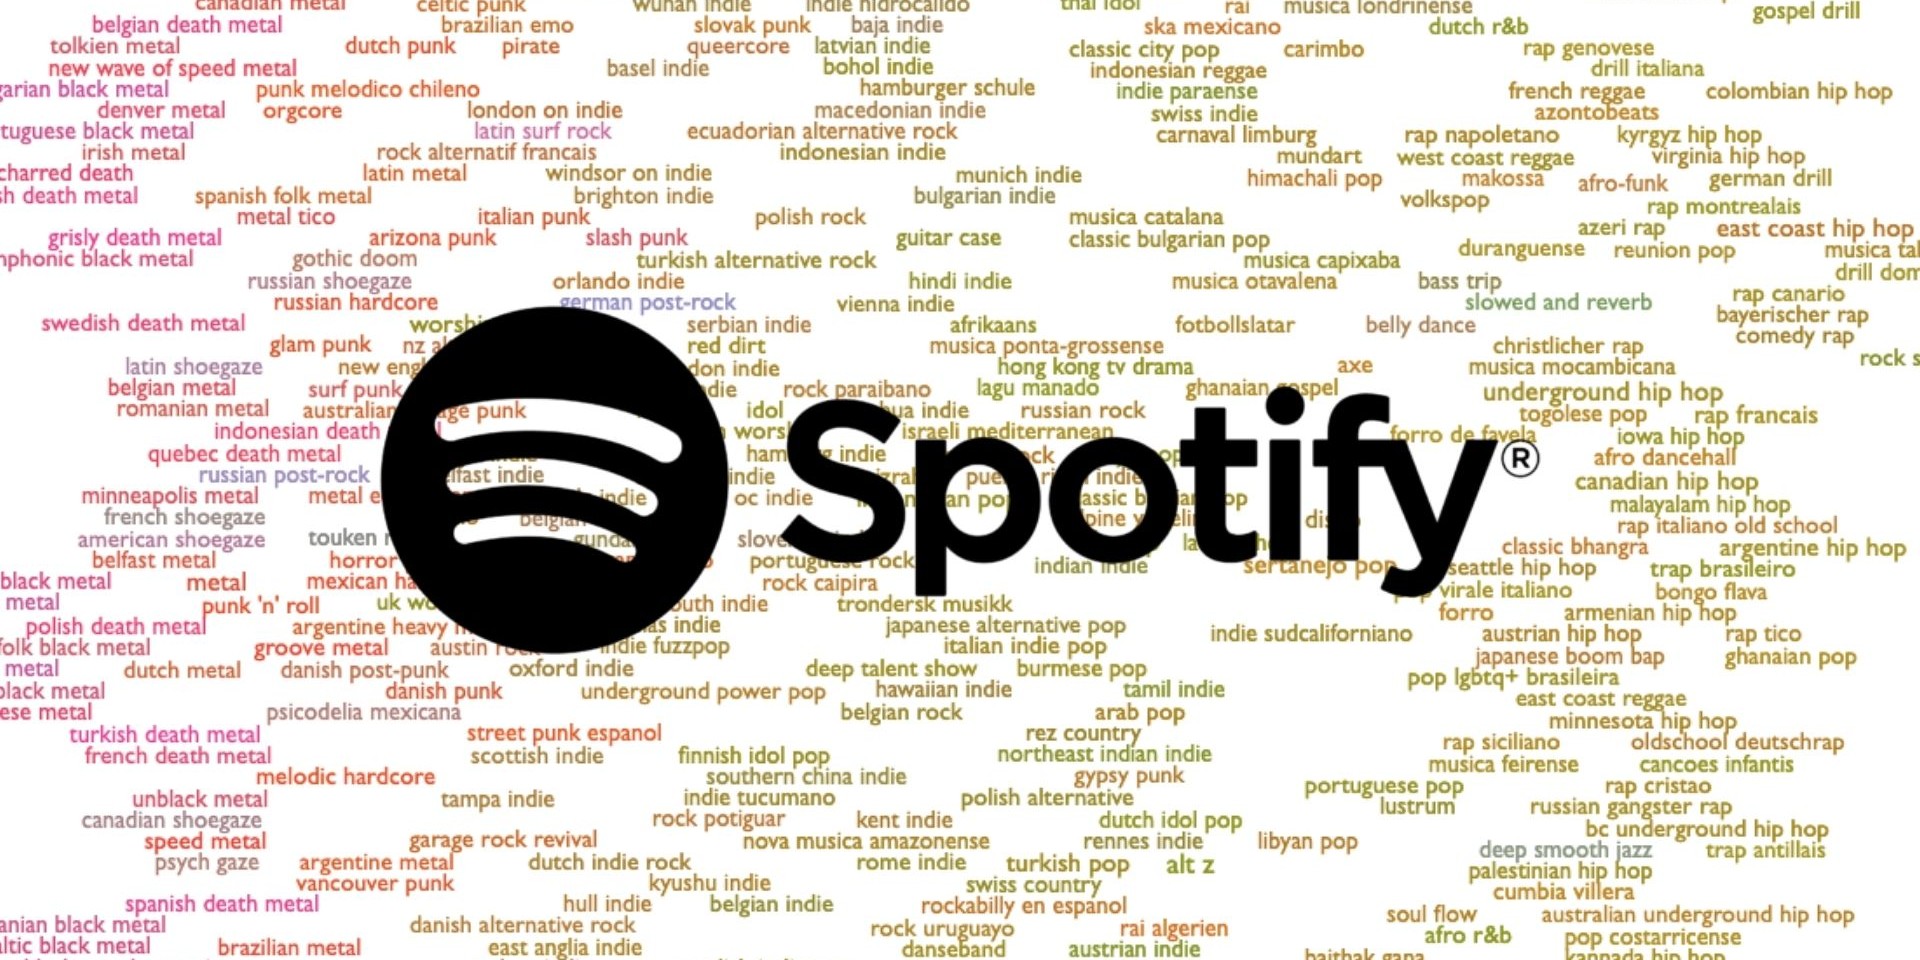 9 music genres on Spotify you might not have heard of before